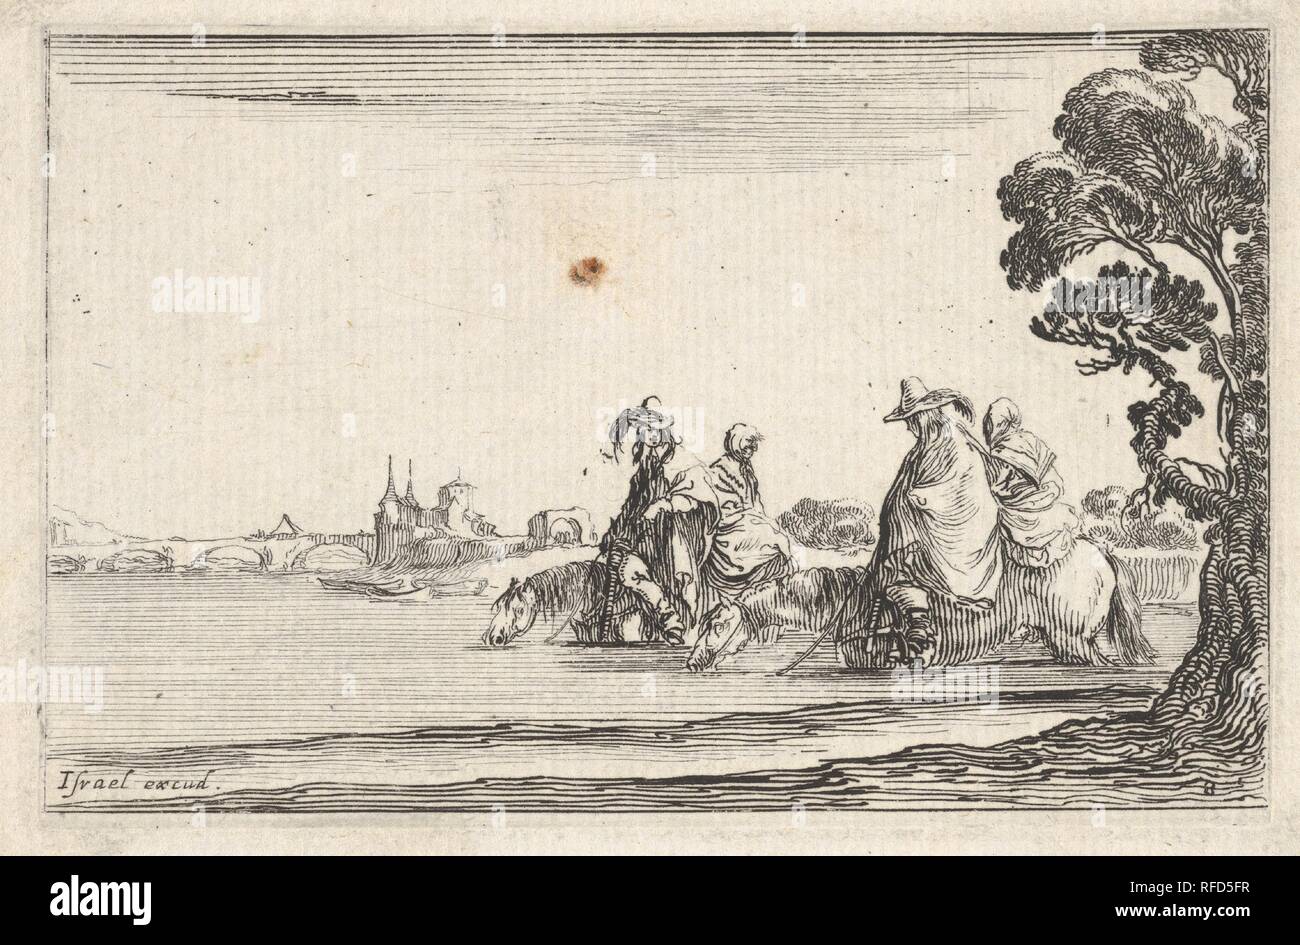 Plate 8: two horsemen in hats at right, each with a woman seated behind them, riding towards the left in profile across a river, a tree at far right, from 'Caprice faict par de la Bella'. Artist: Stefano della Bella (Italian, Florence 1610-1664 Florence). Dimensions: Sheet: 2 9/16 x 3 11/16 in. (6.5 x 9.4 cm)  Plate: 2 3/16 x 3 5/16 in. (5.5 x 8.4 cm). Publisher: Israël Henriet (French, Nancy ca. 1590-1661 Paris). Series/Portfolio: 'Caprice faict par de la Bella'. Date: ca. 1642. Museum: Metropolitan Museum of Art, New York, USA. Stock Photo